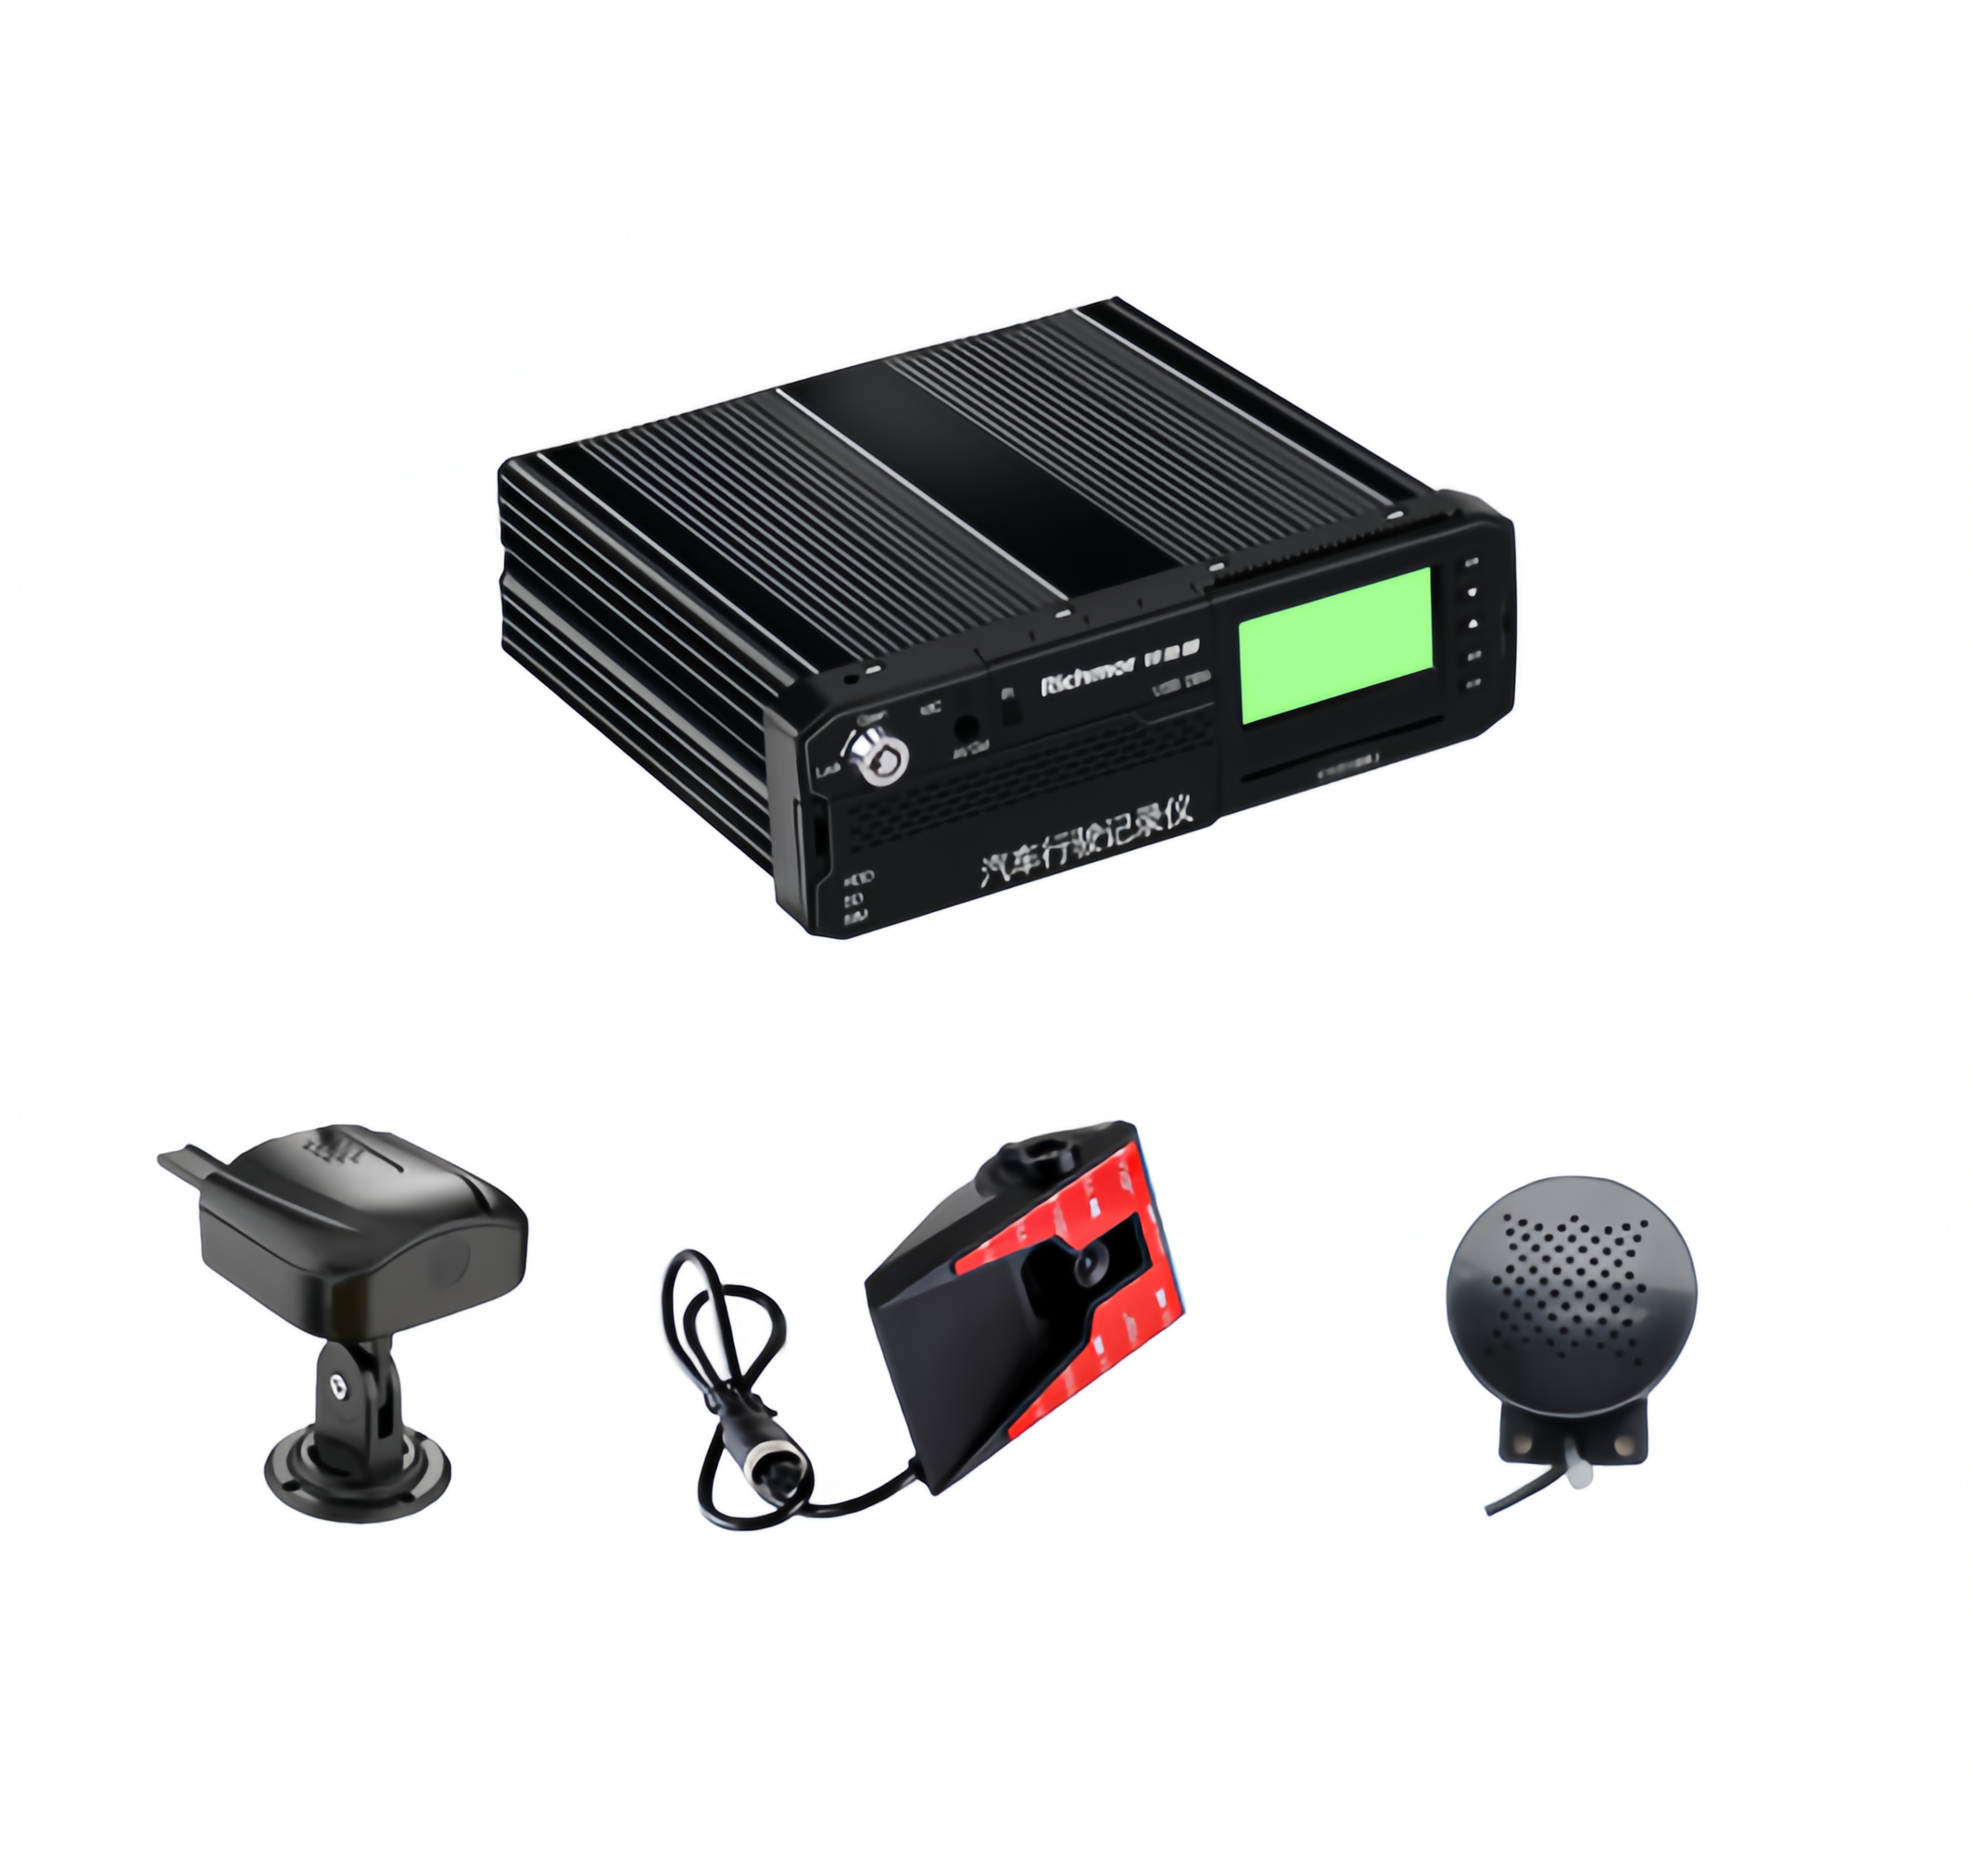 8 channel MDVR kit including MDVR and the ADAS ,DSM camera，have the 2* BSD function Includes some accessories, power cords, speaker，etc.